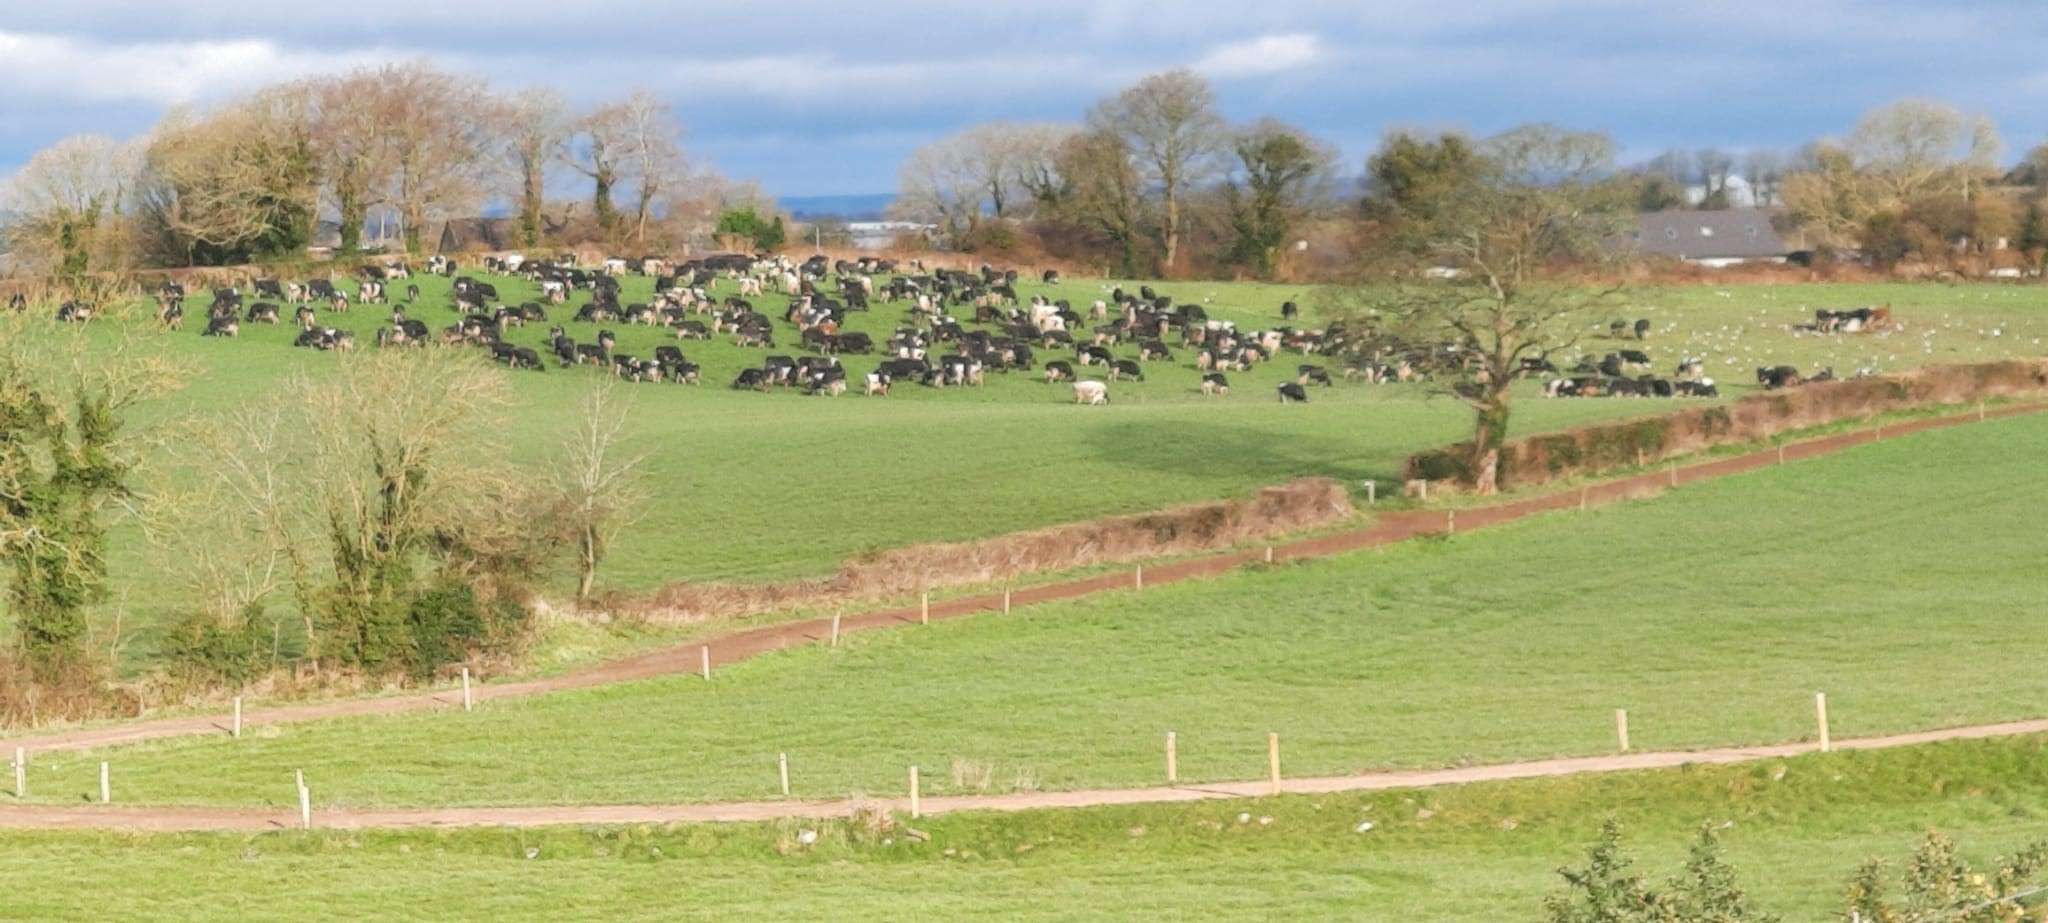 Photo of the dairy herd at the Salesian Agricultural College, Pallaskenry, County Limerick